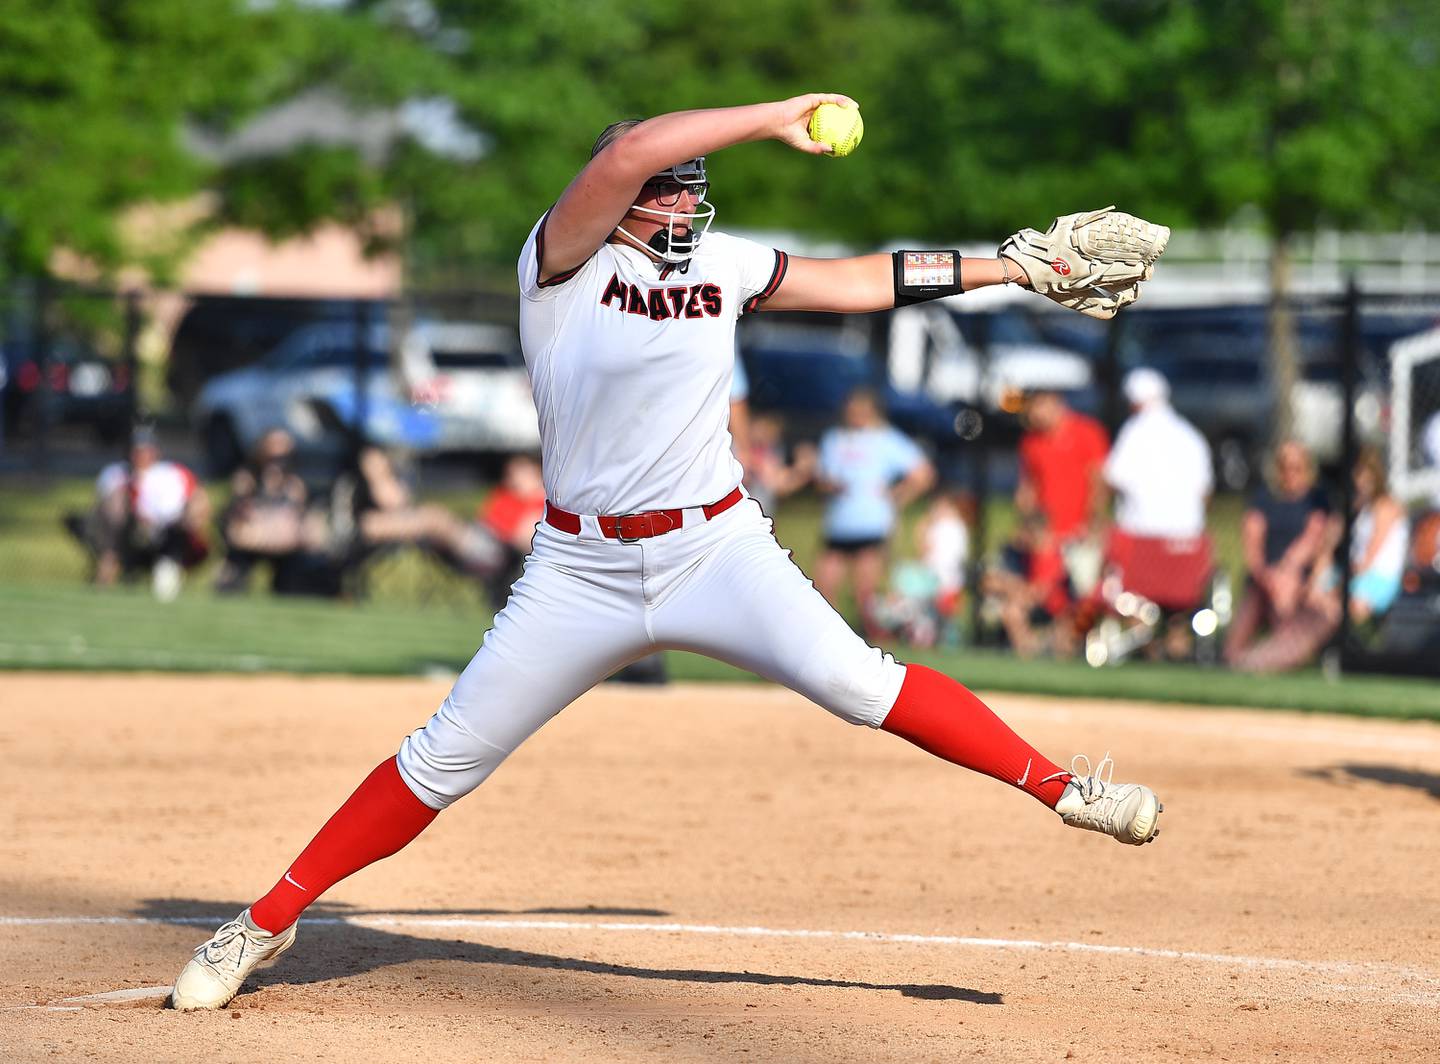 Ottawa's McKenzie Oslanzi winds up for a pitch during the Lemont Class 3A Sectional final game against Lemont on Friday, June 2, 2023, at Lemont.